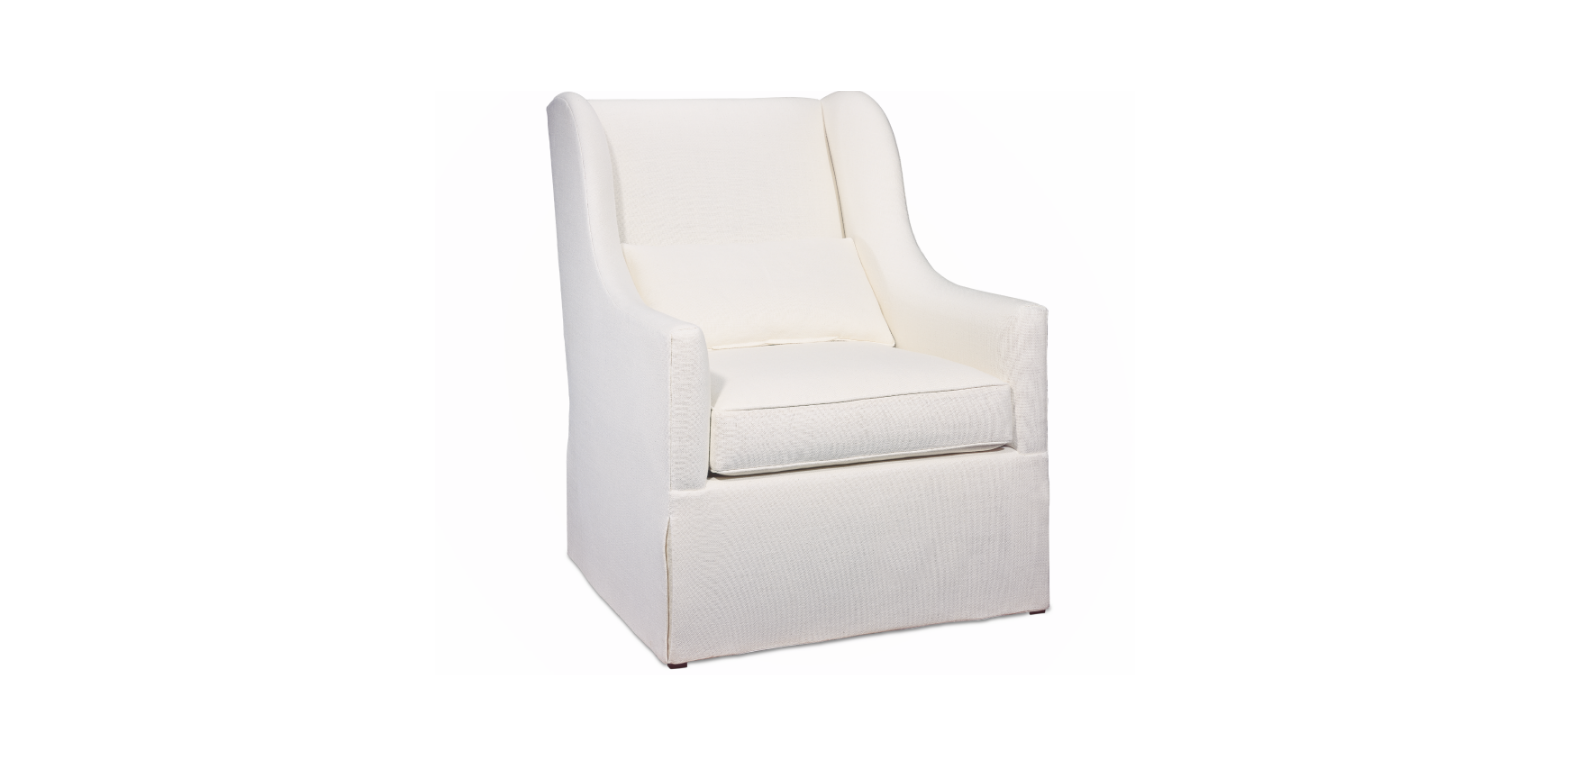 COIMBRA II CHAIR WITH SKIRT